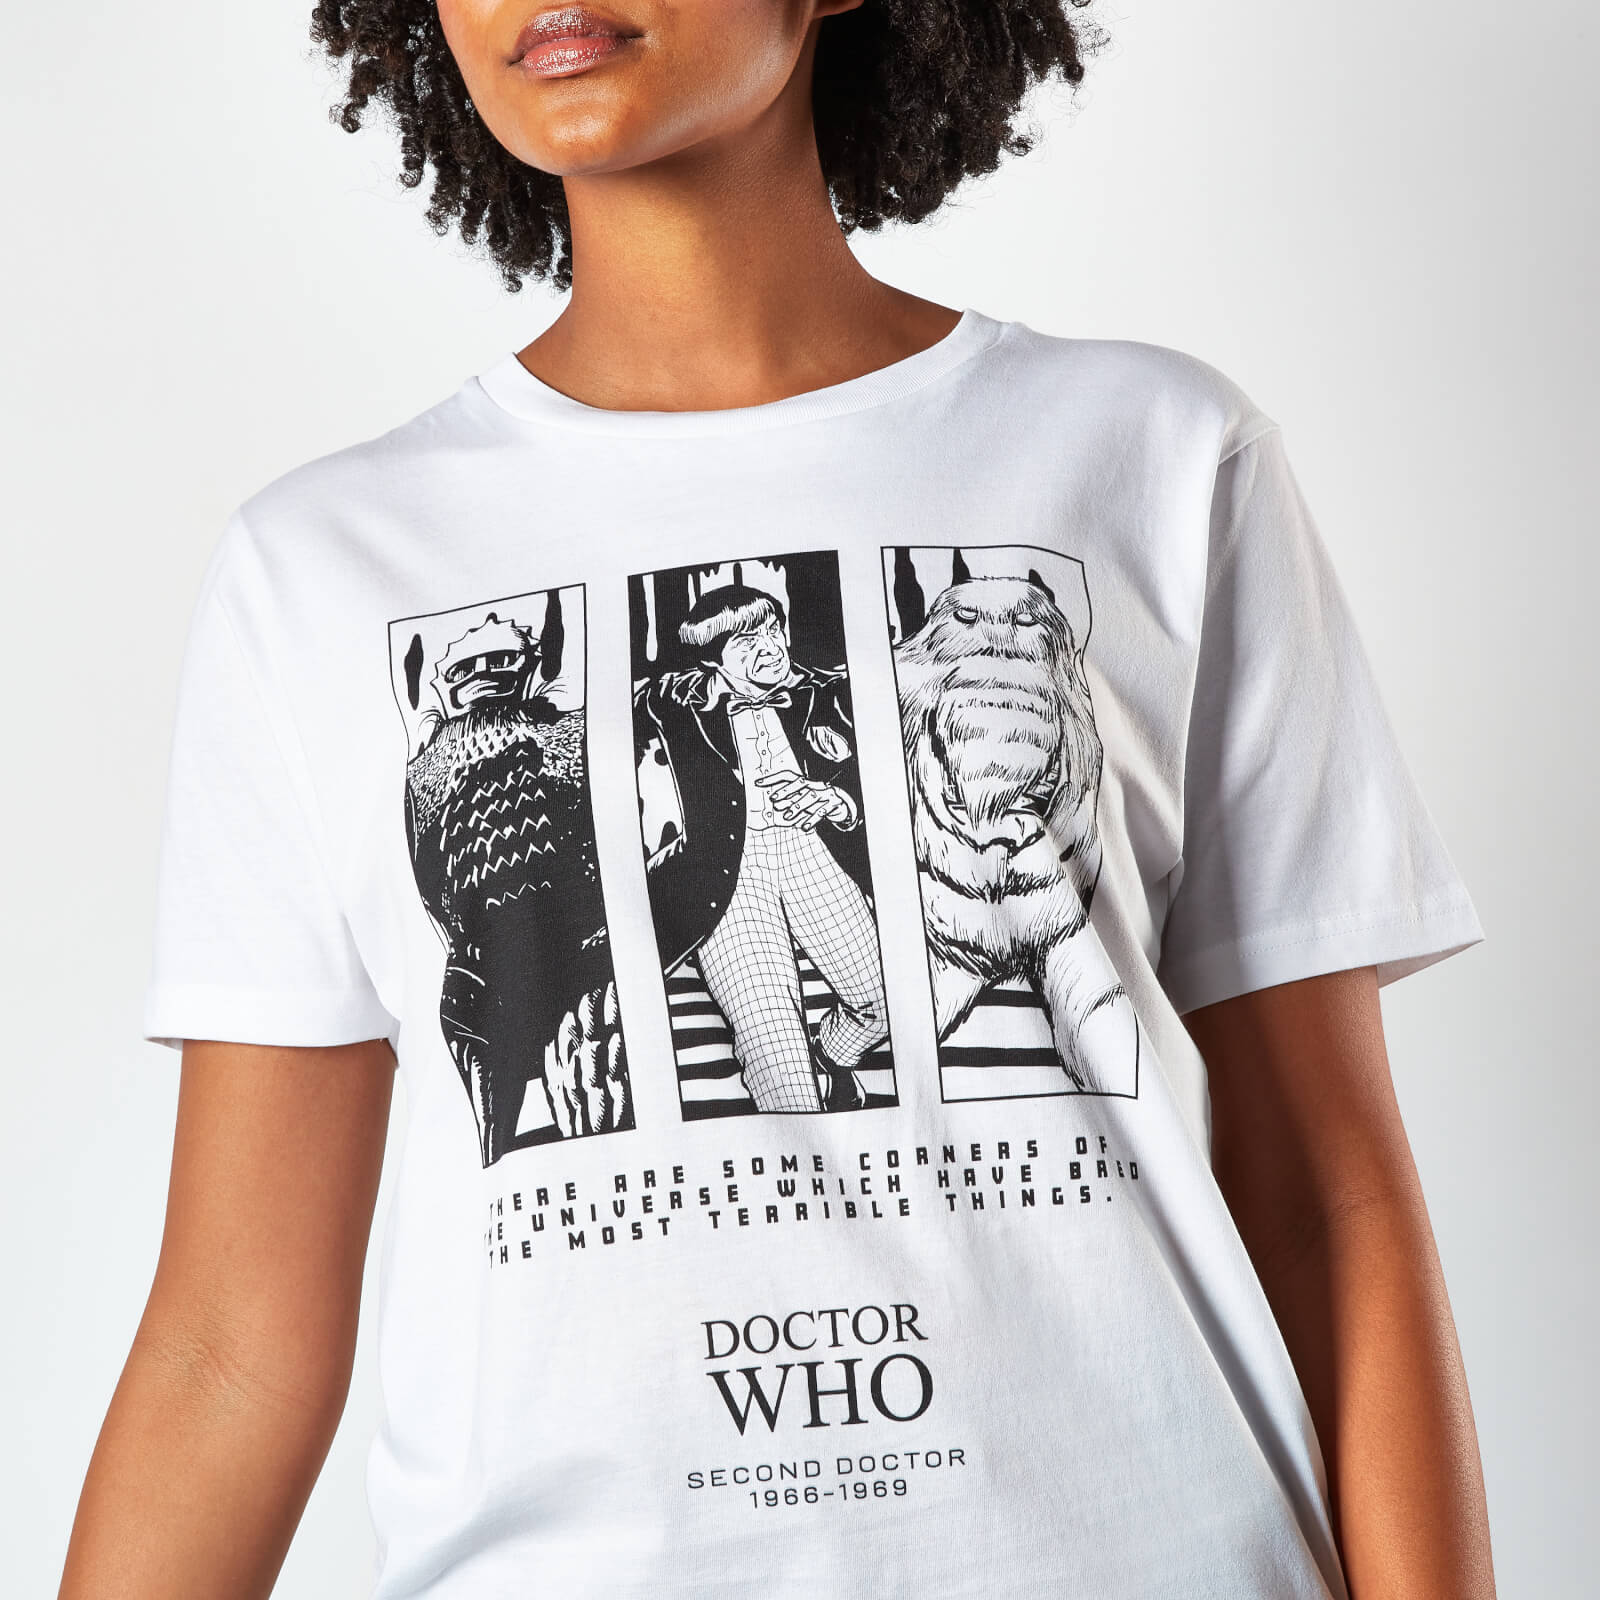 Doctor Who 2nd Doctor Women's T-Shirt - White - 5XL